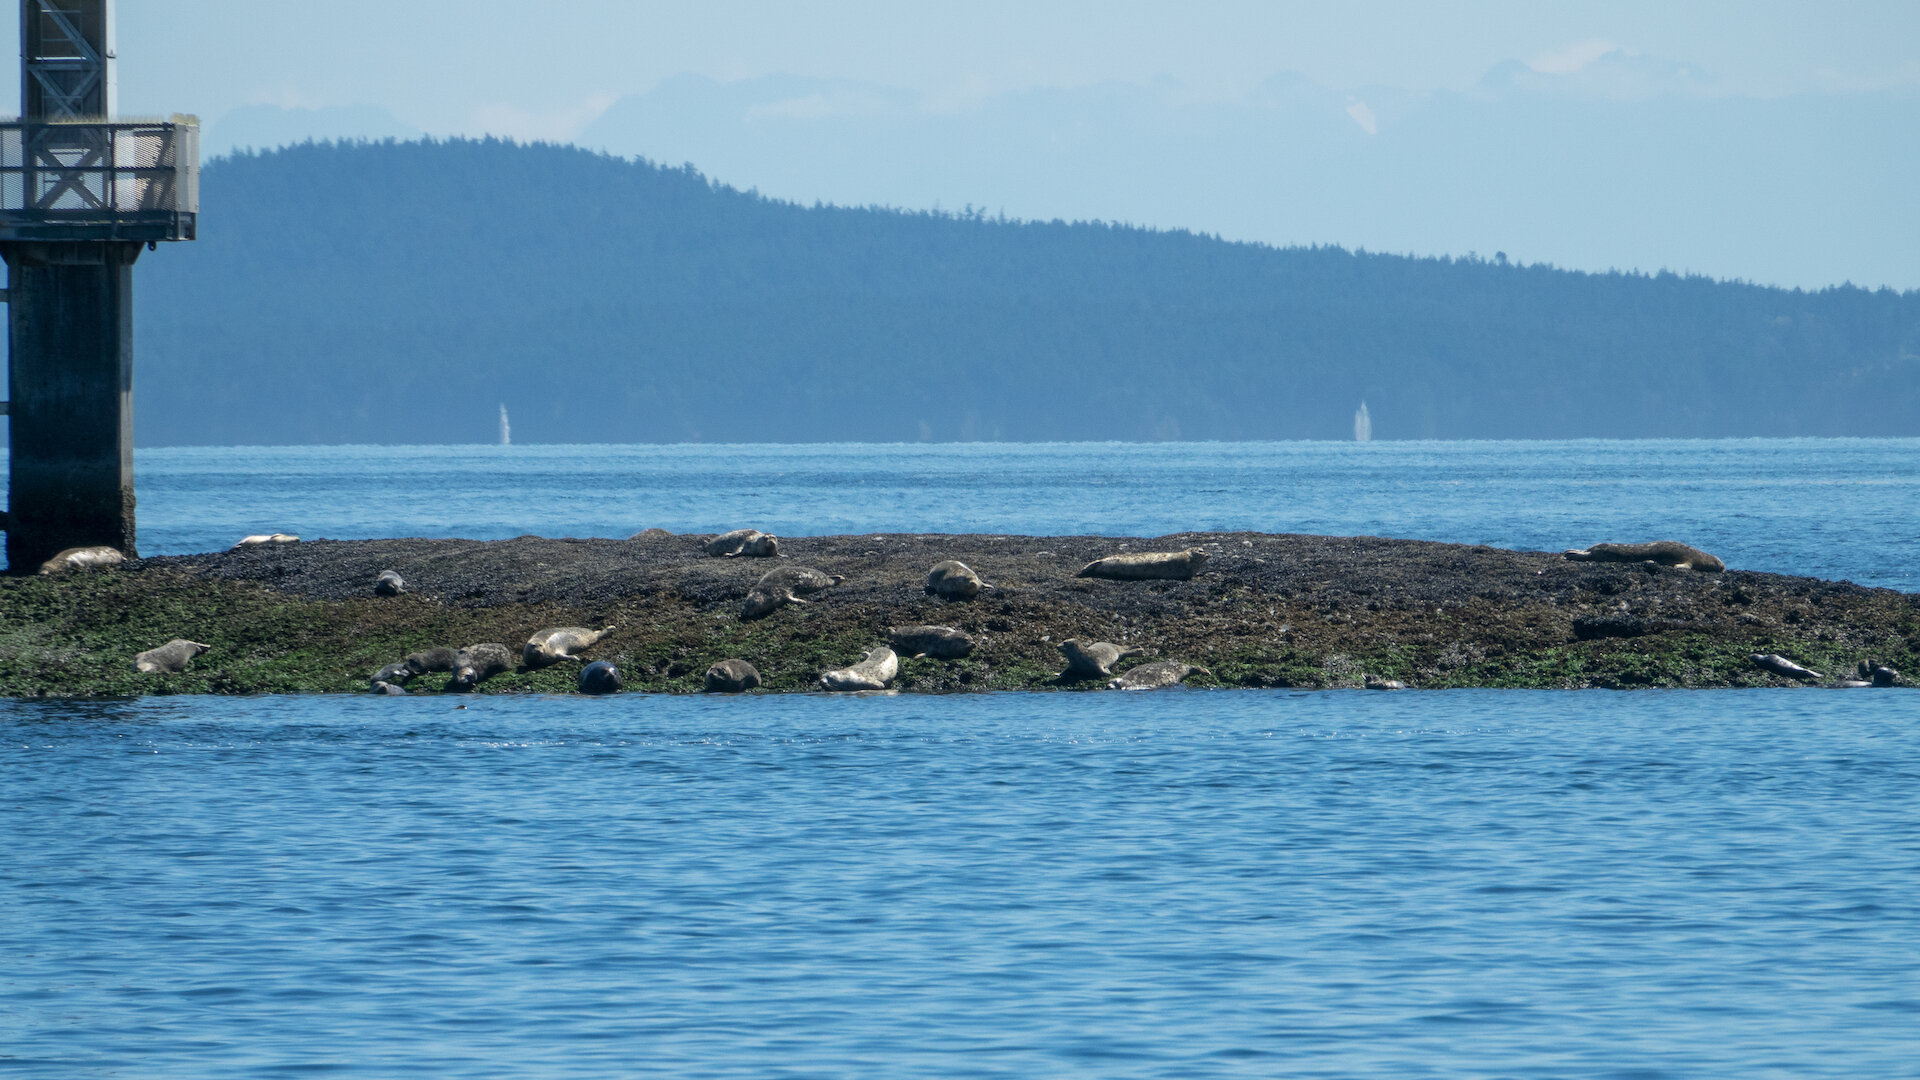  The usual collection of harbor seals hanging out on the rocks. 